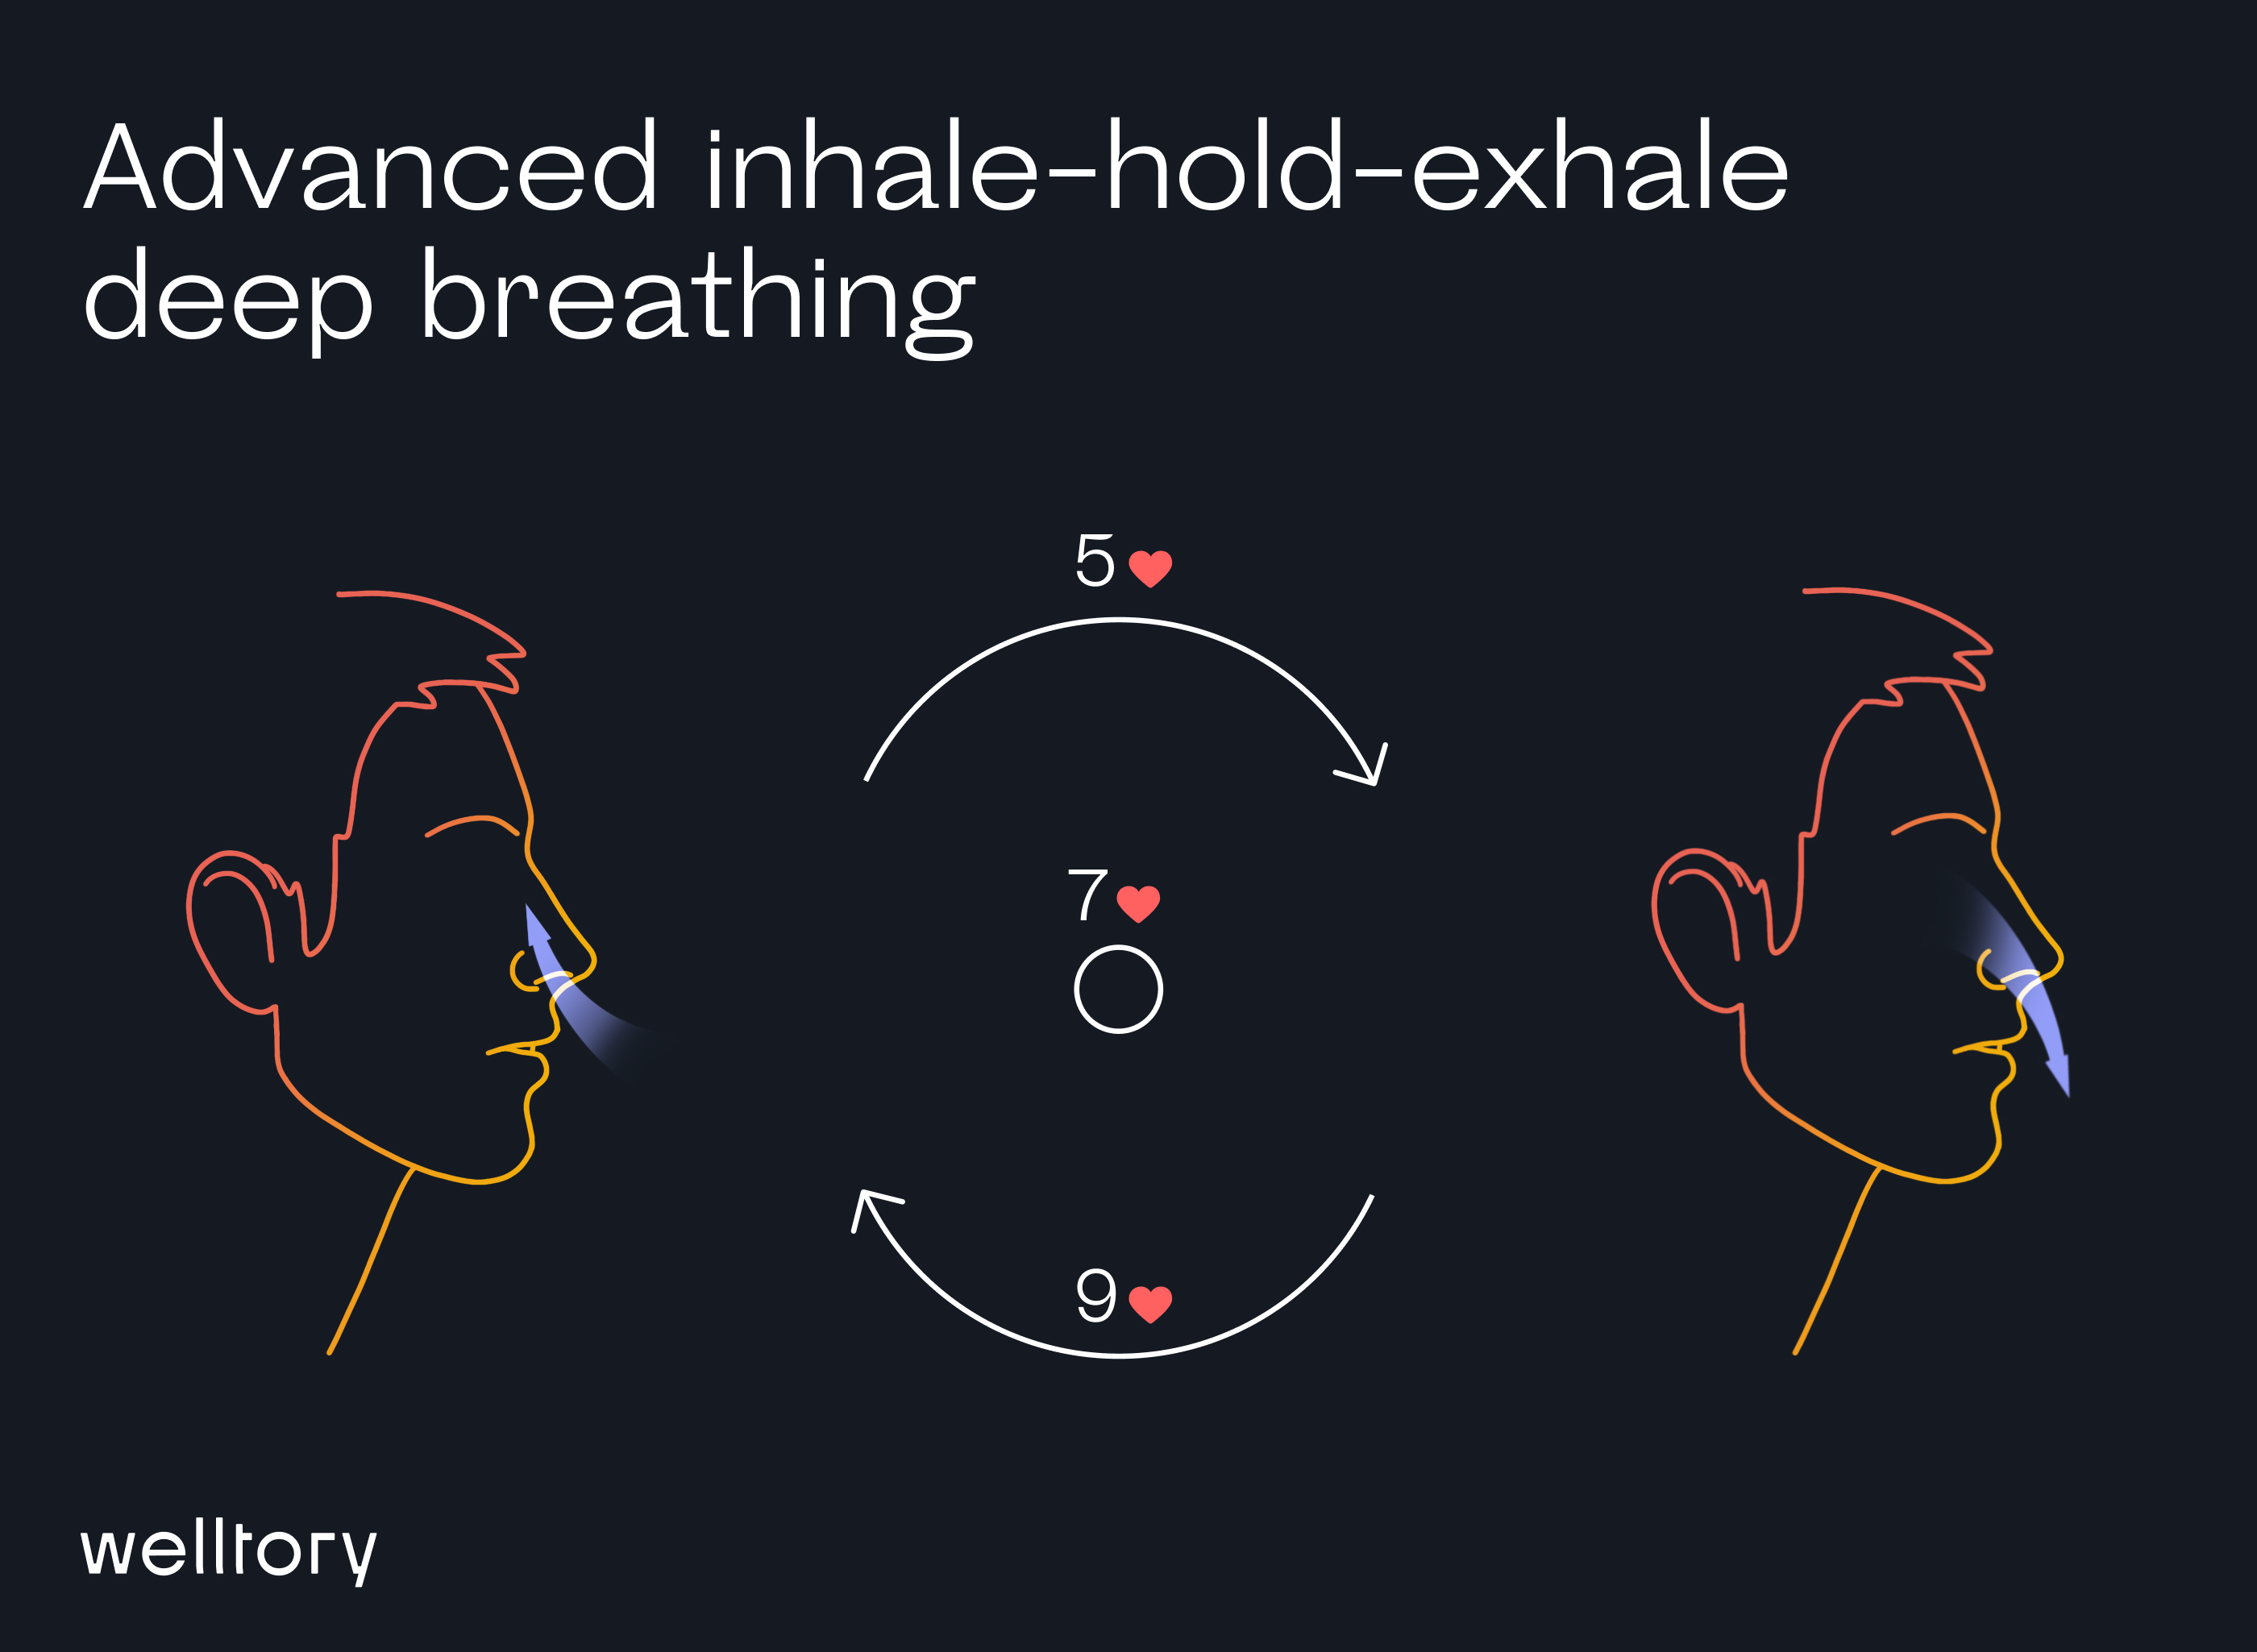 Advanced inhale-hold-exhale deep breathing